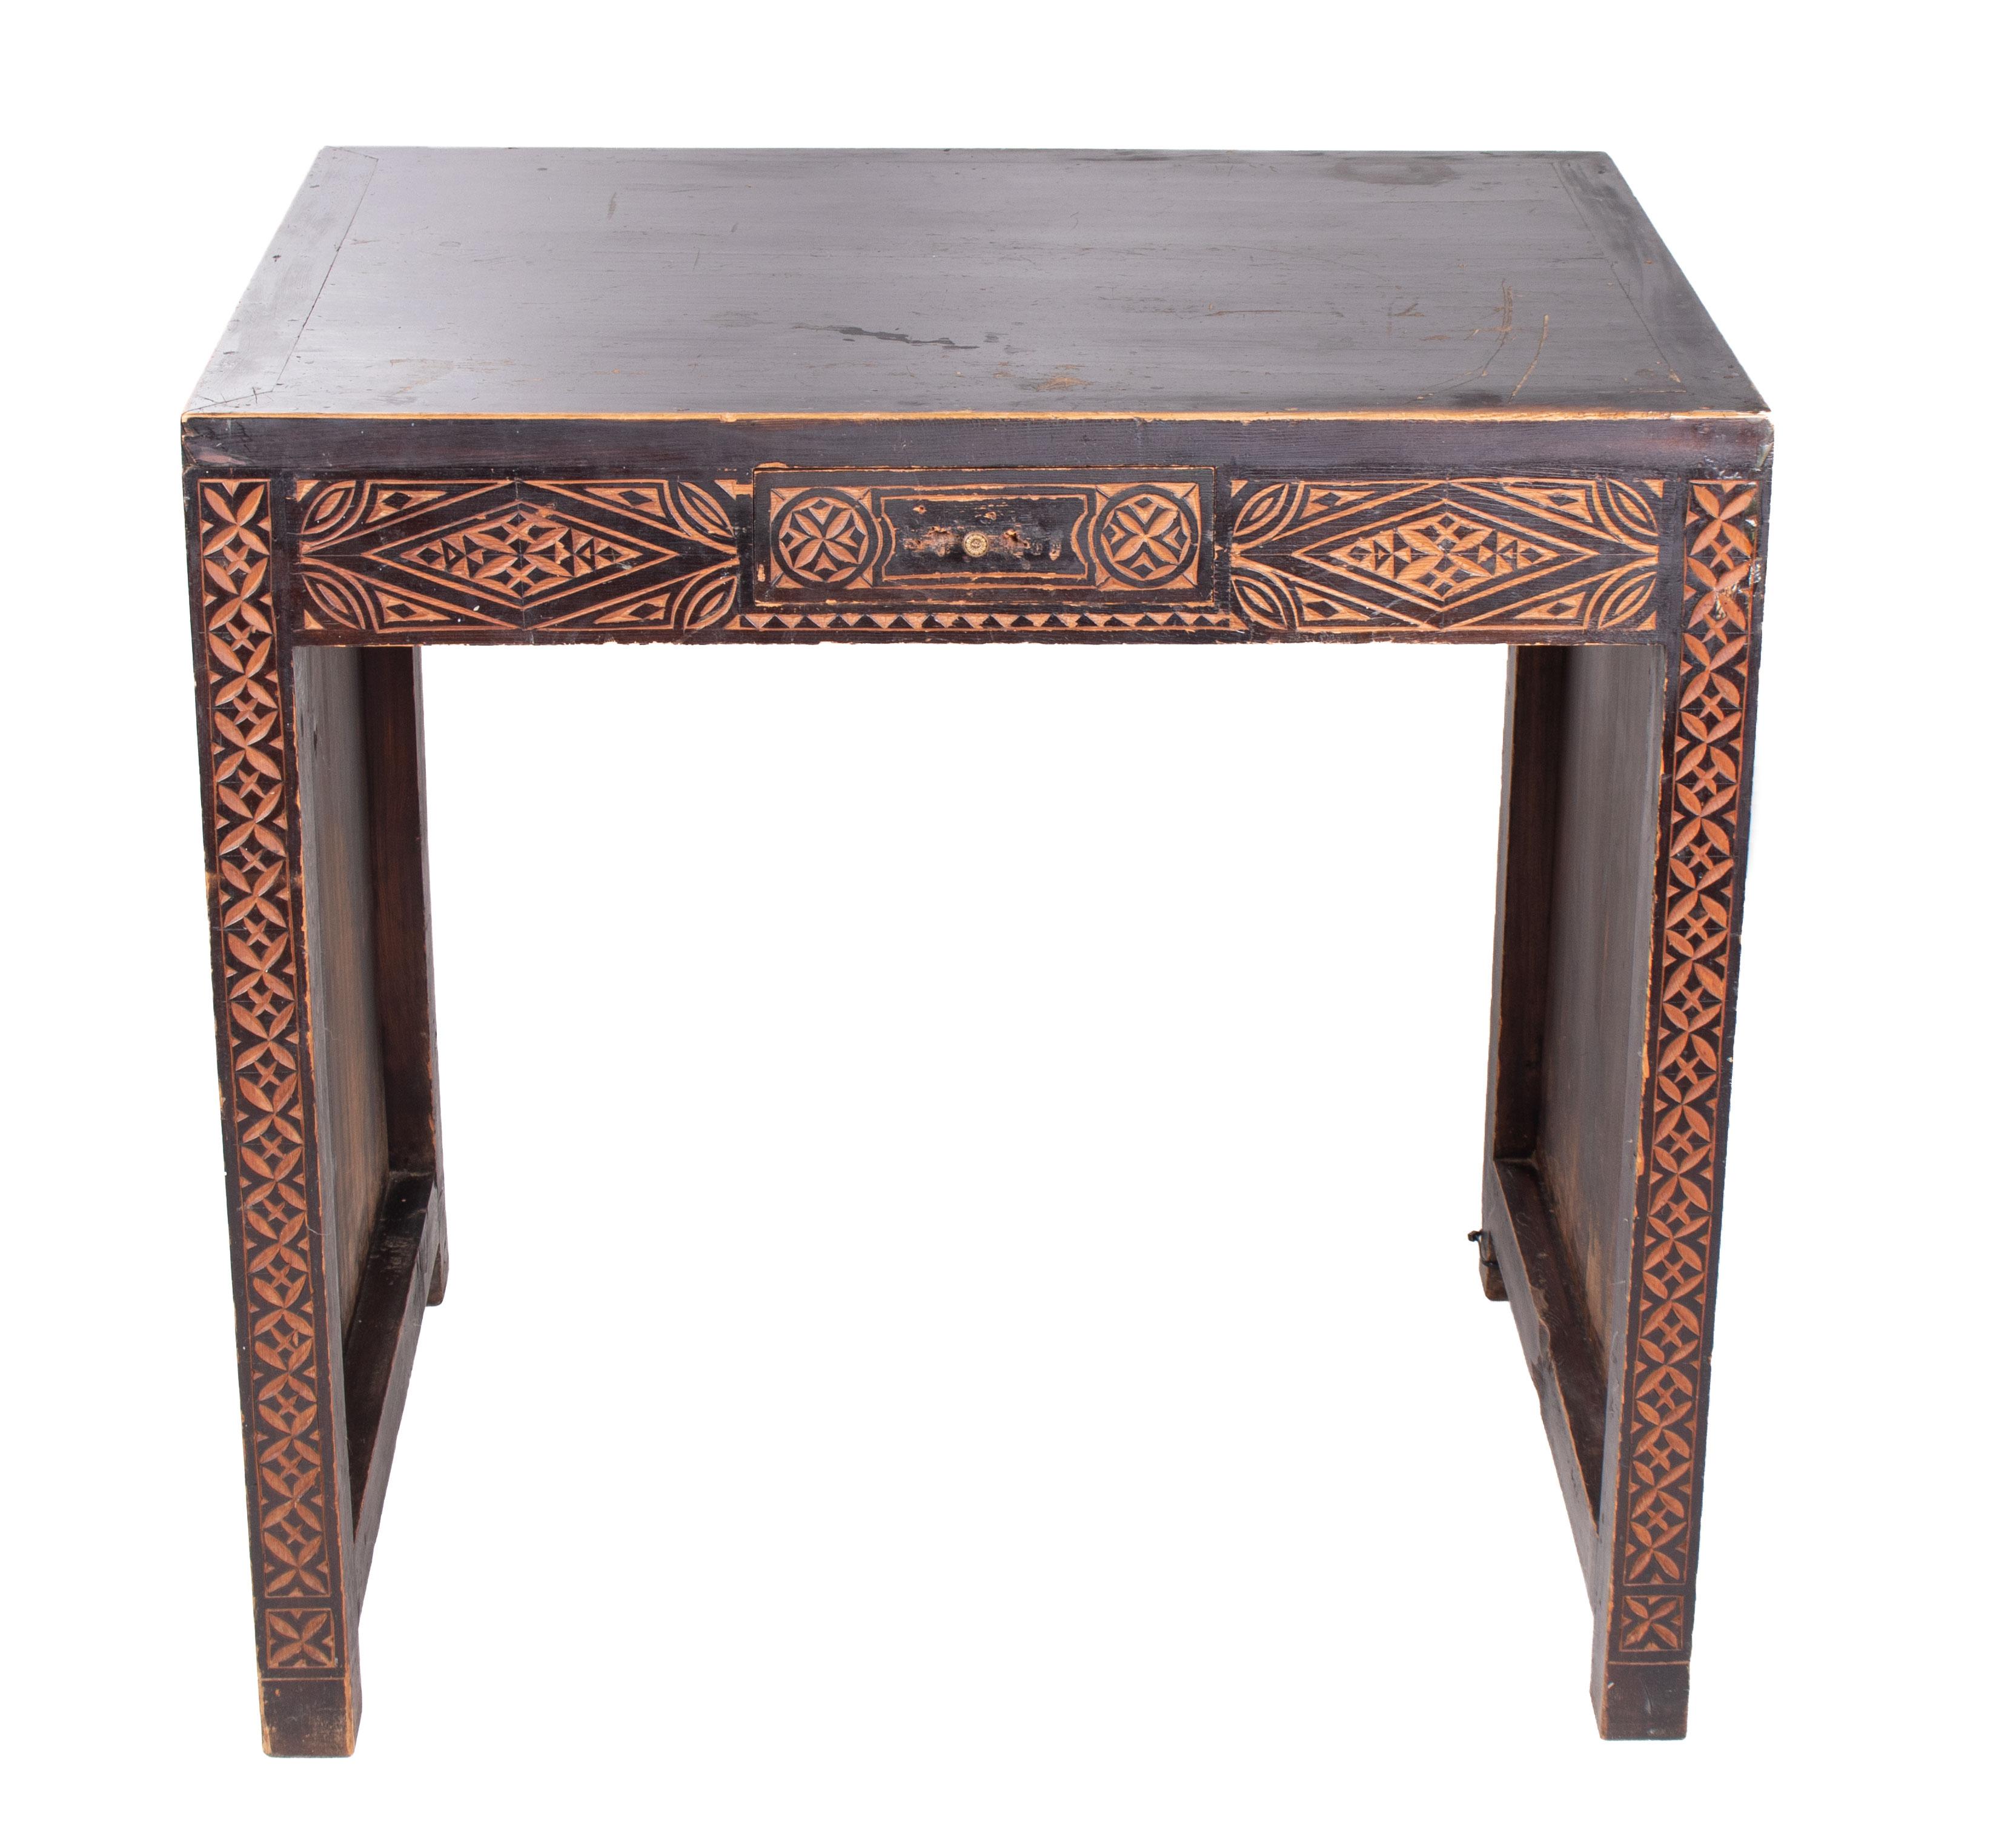 1930s Turkish hand carved wooden single drawer table.